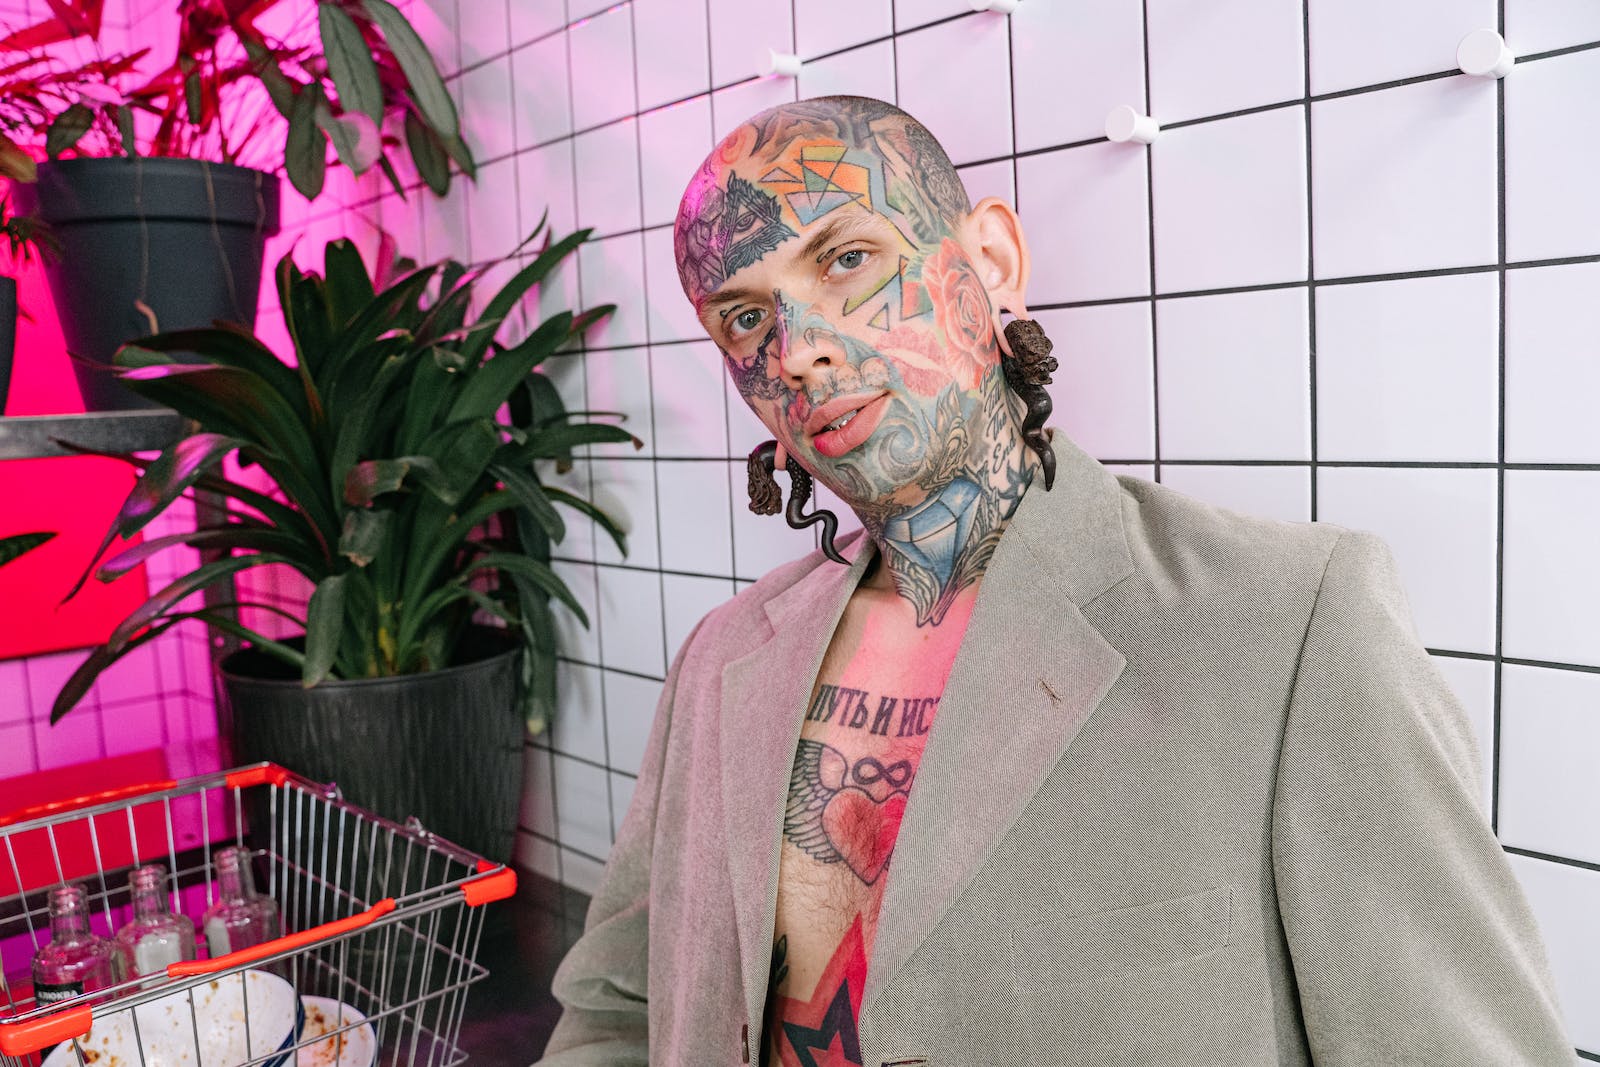 Man in Gray Blazer with Tattoo on Face